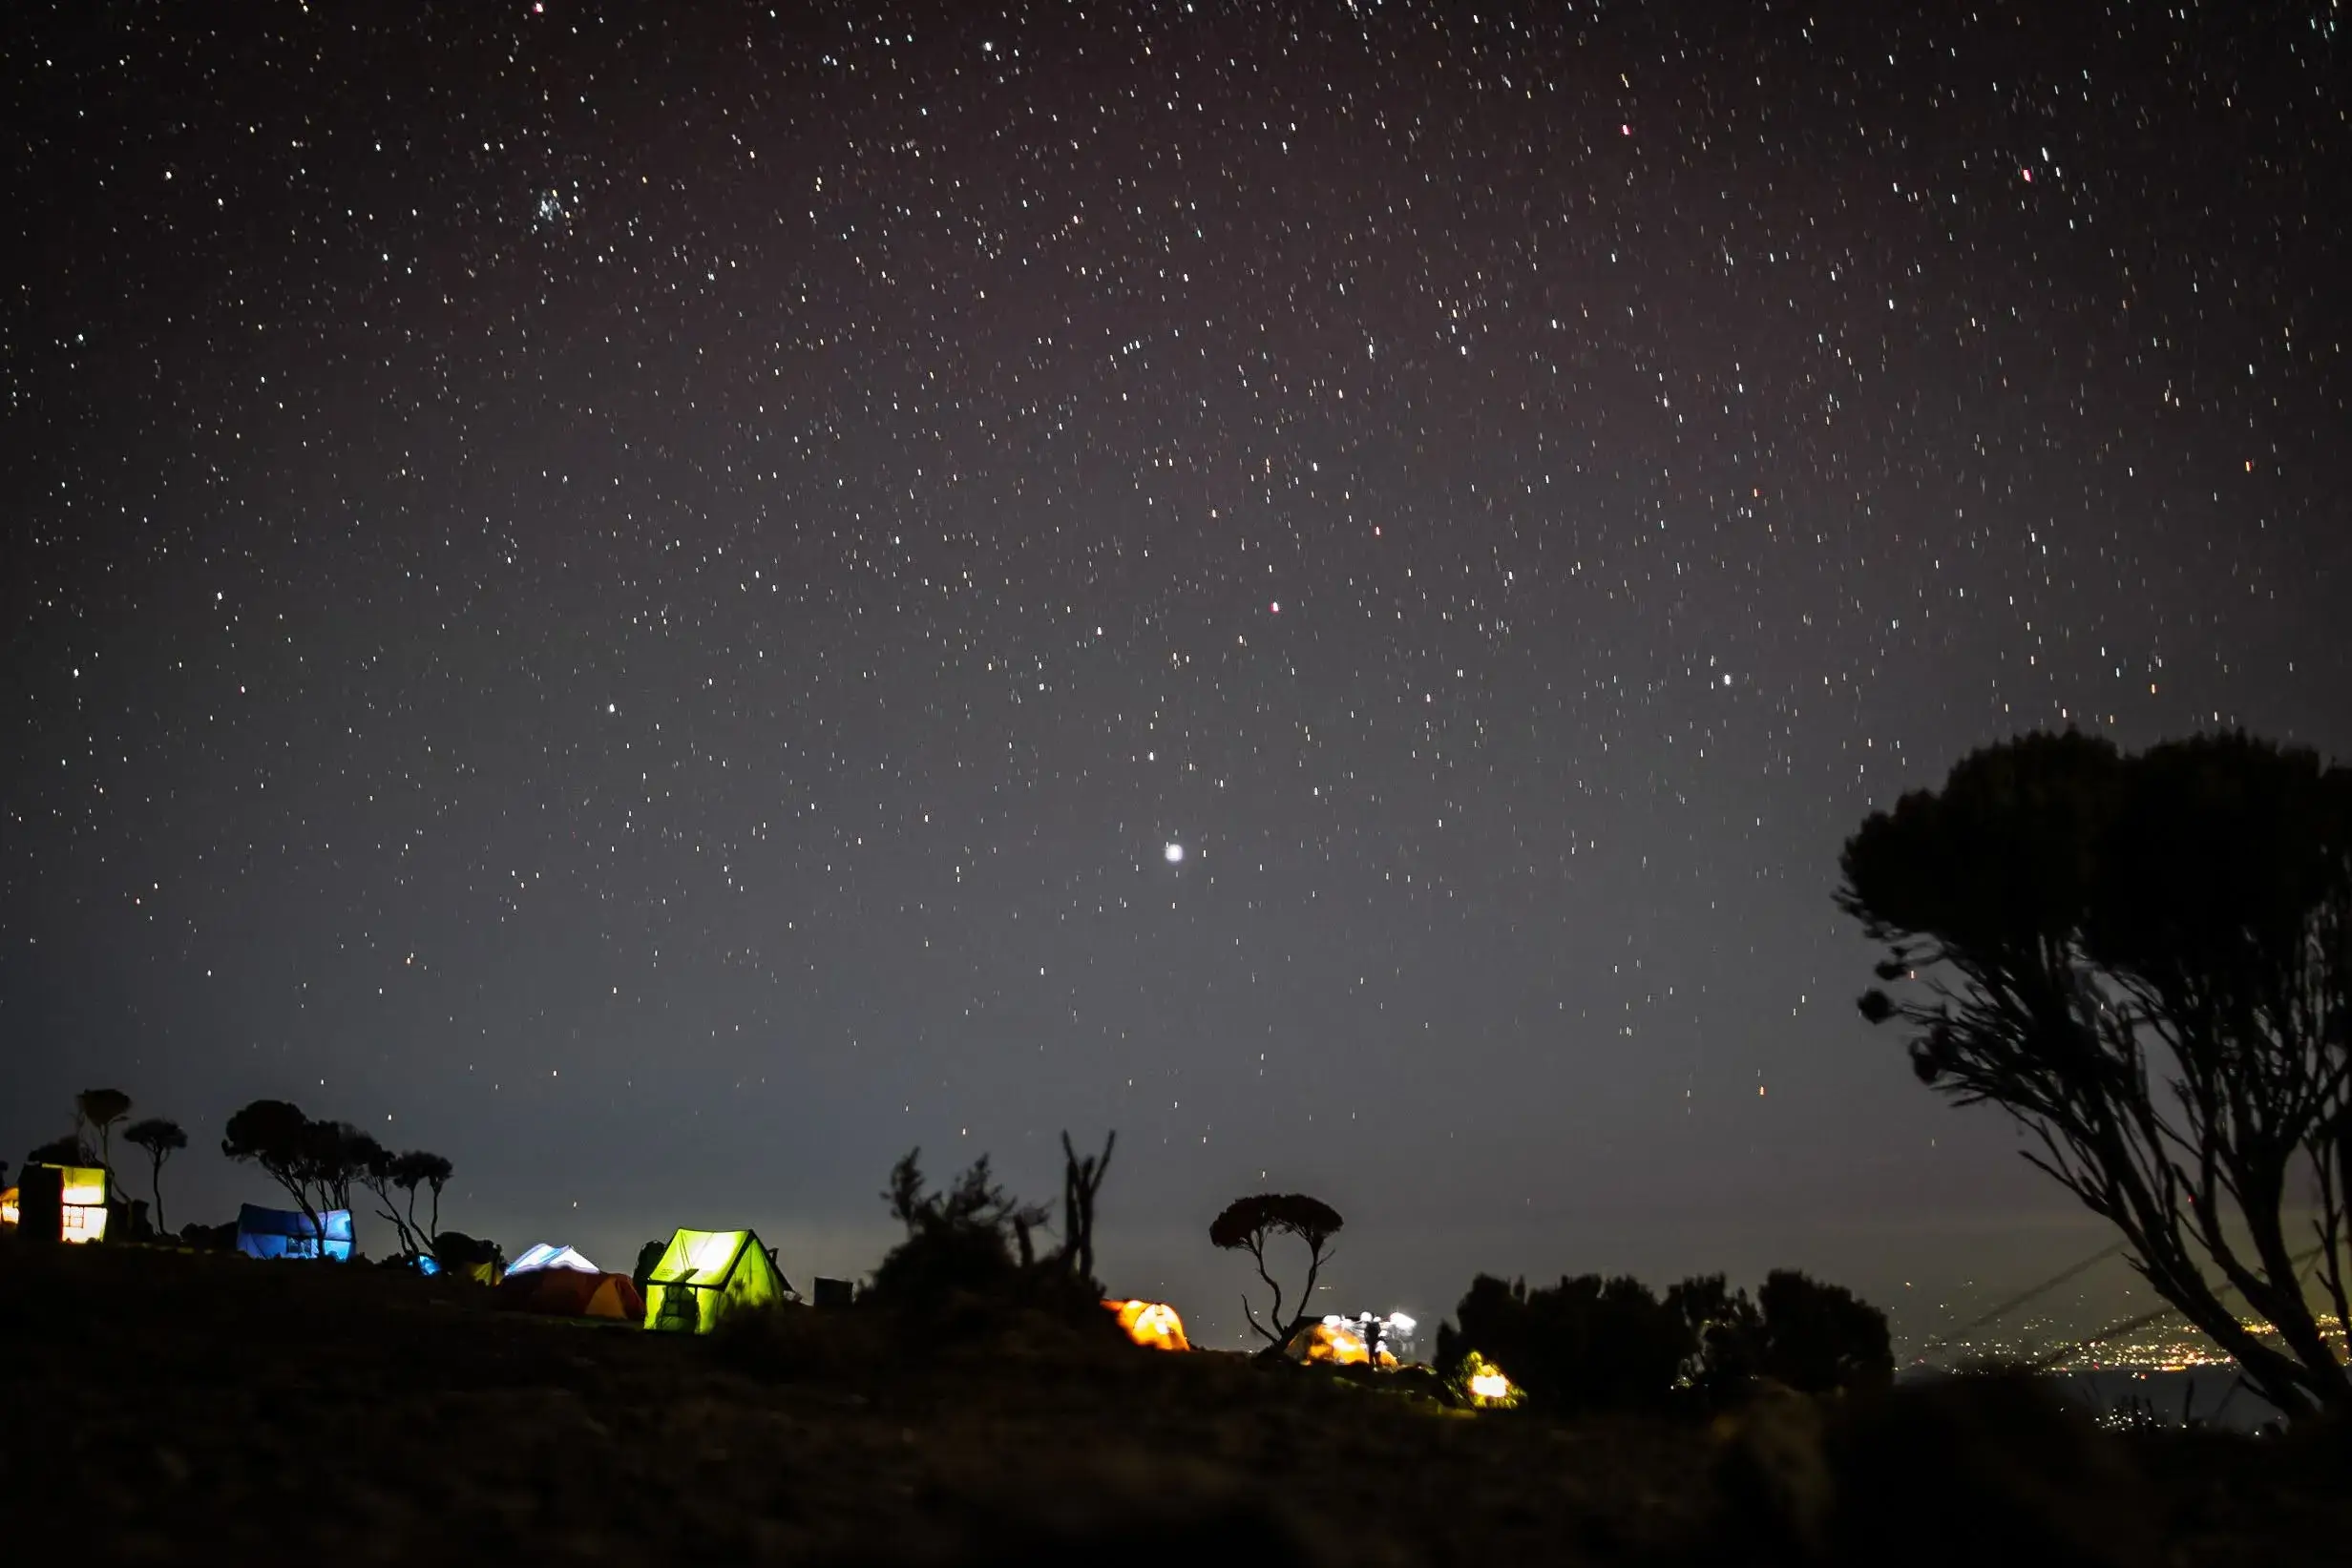 Night view of stars and Camping tents of afrikan adventures in treks.